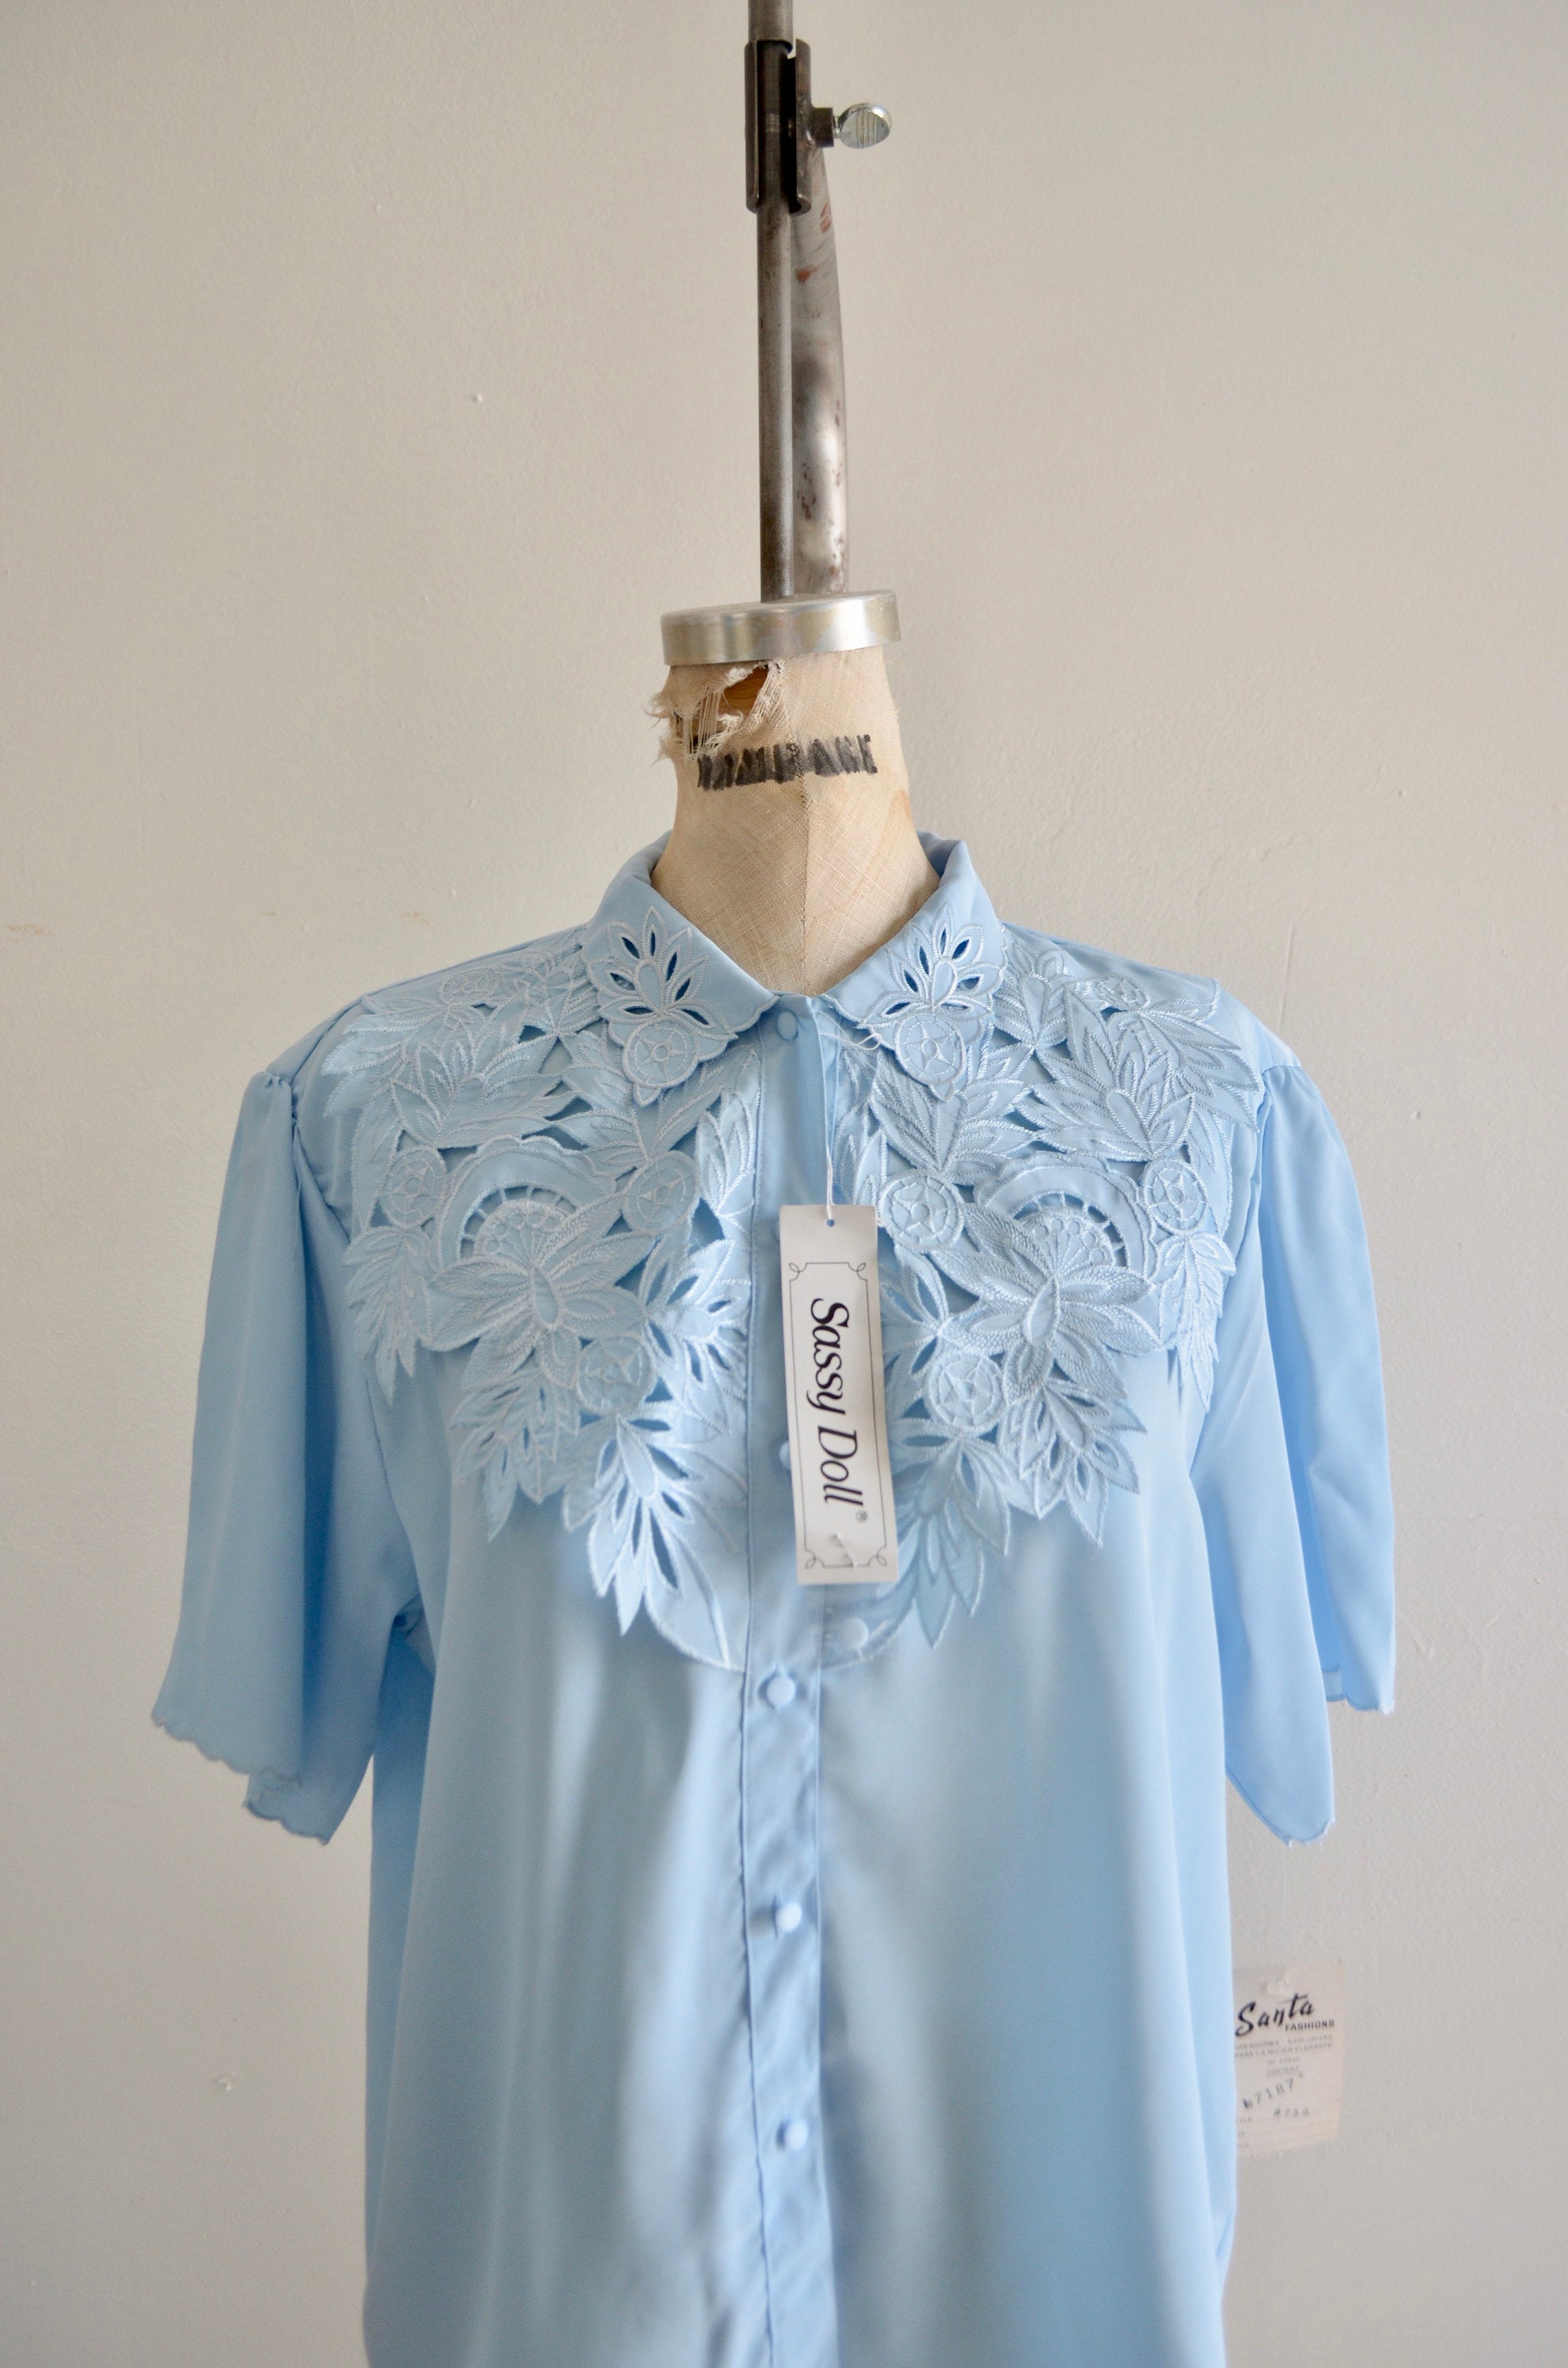 Nwt 90S Sassy Doll Light Blue Laser Cut Front Top Guipure Lace Collar Blouse Button Shirt